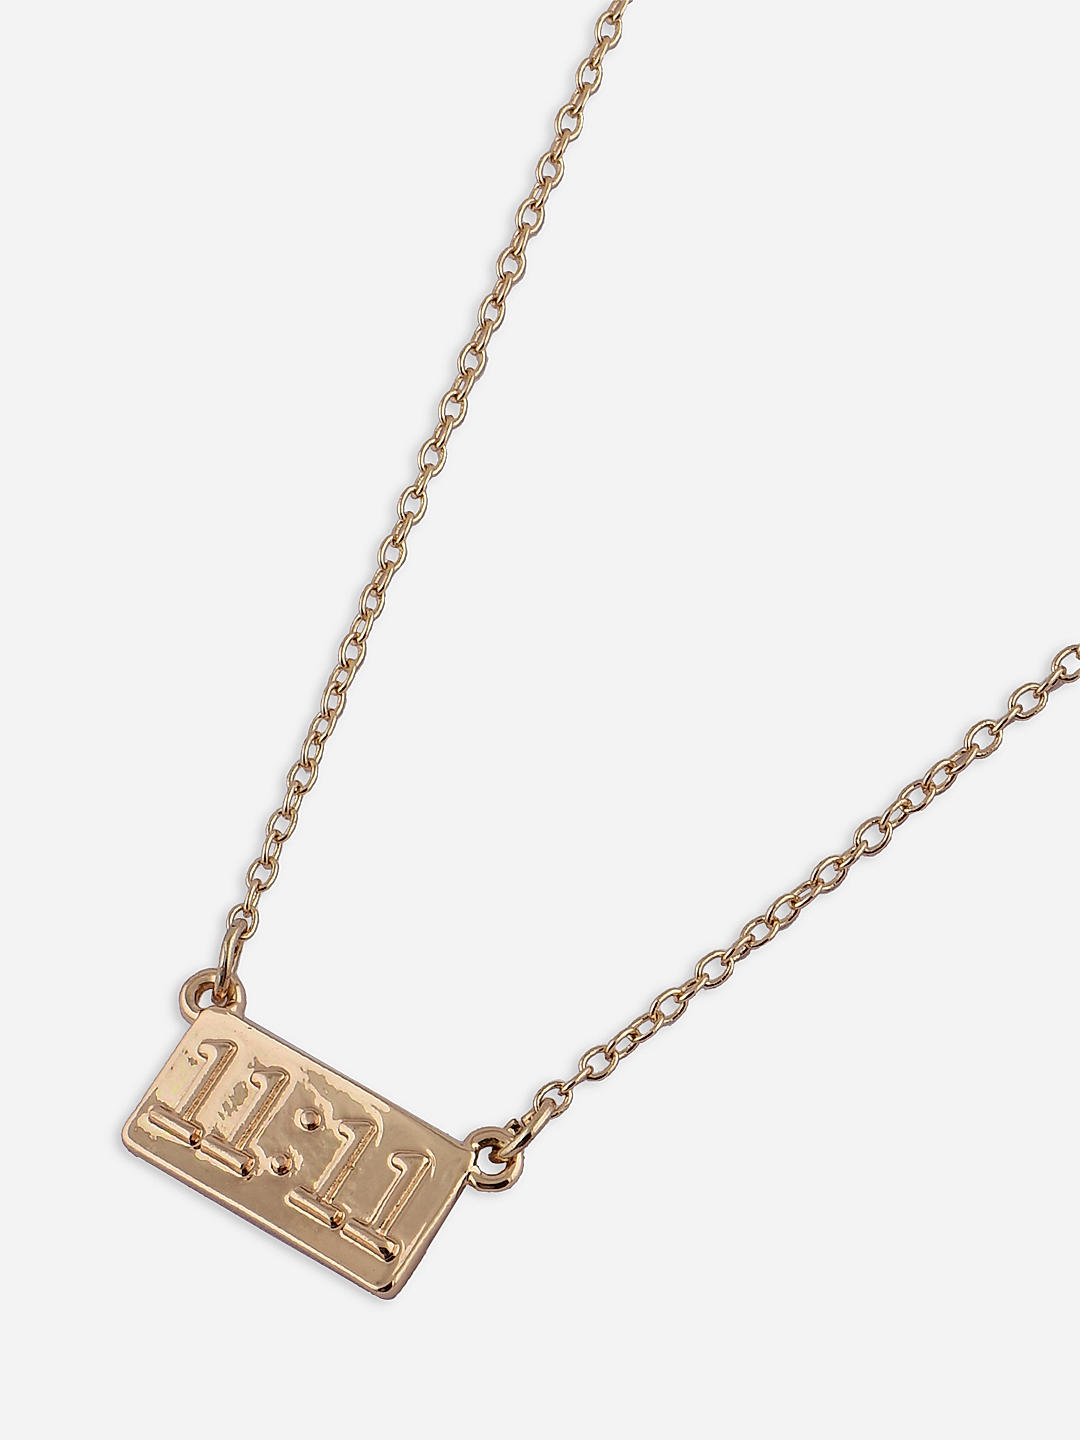 Buy Now Women Charm Necklace @ Best Price